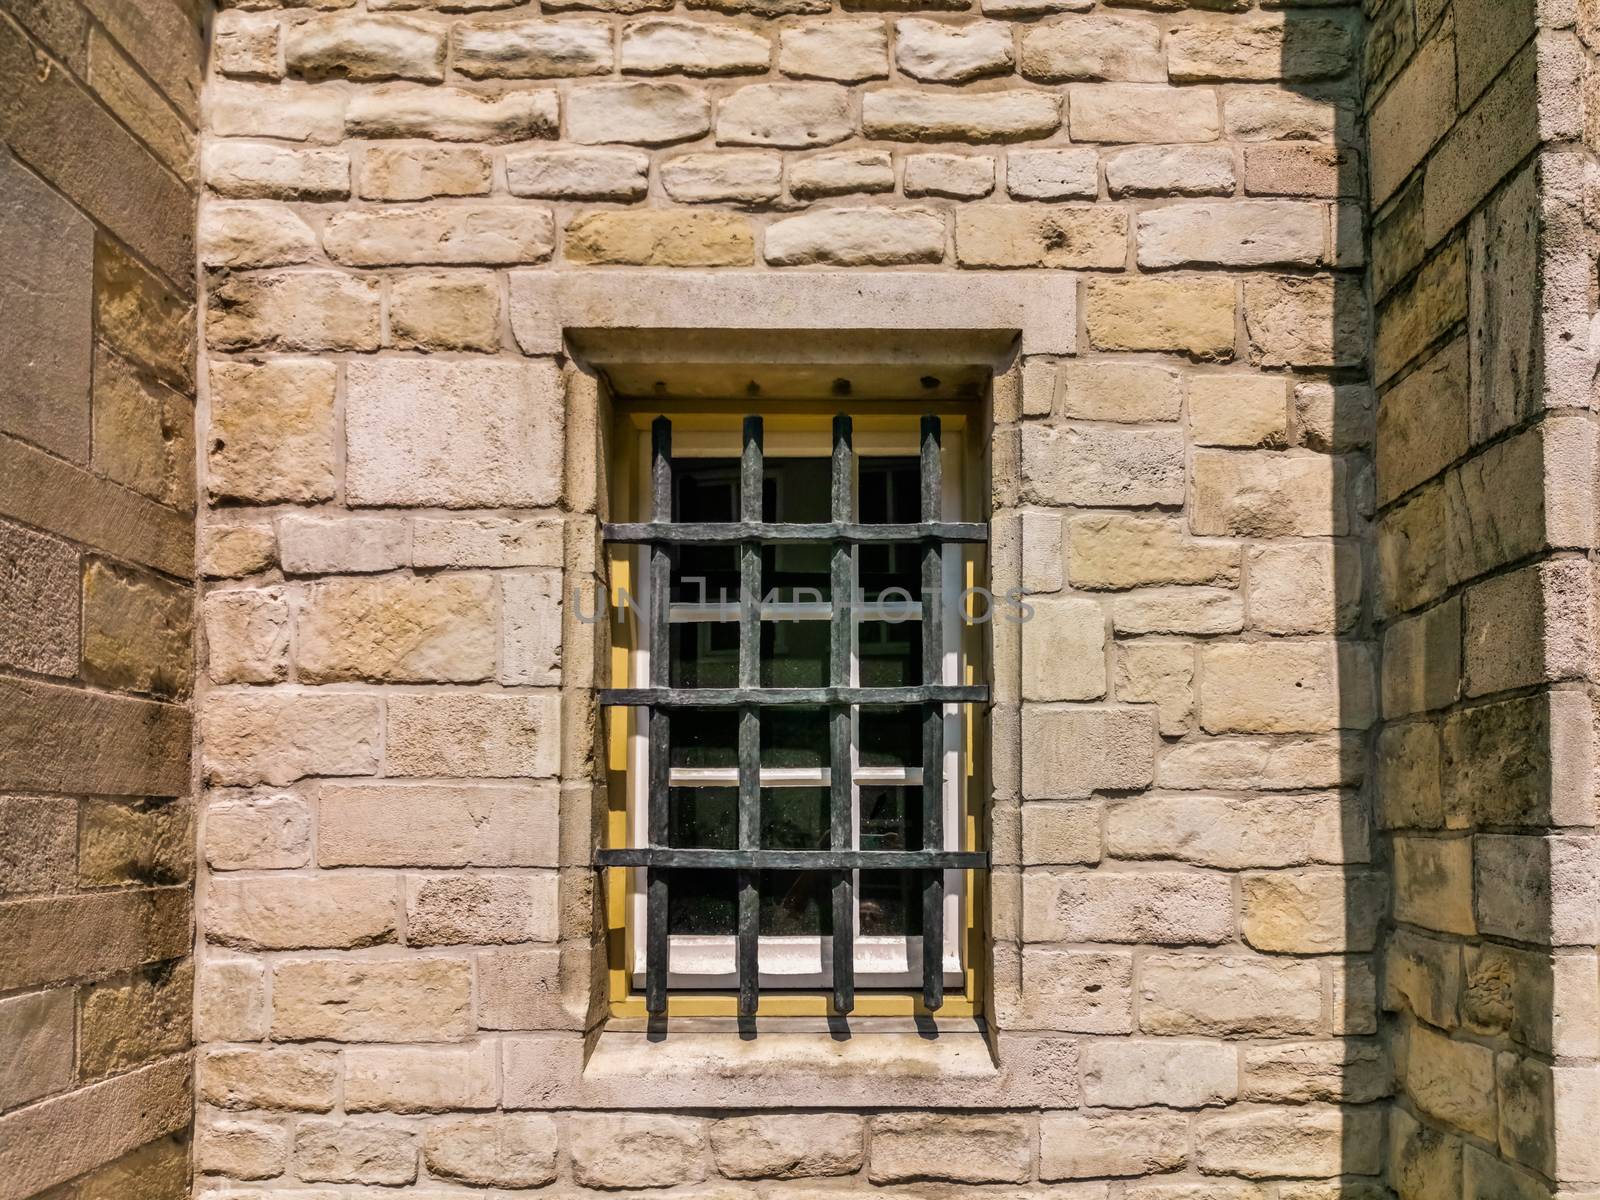 Vintage Wall with barred window, classical jail architecture, Prison background